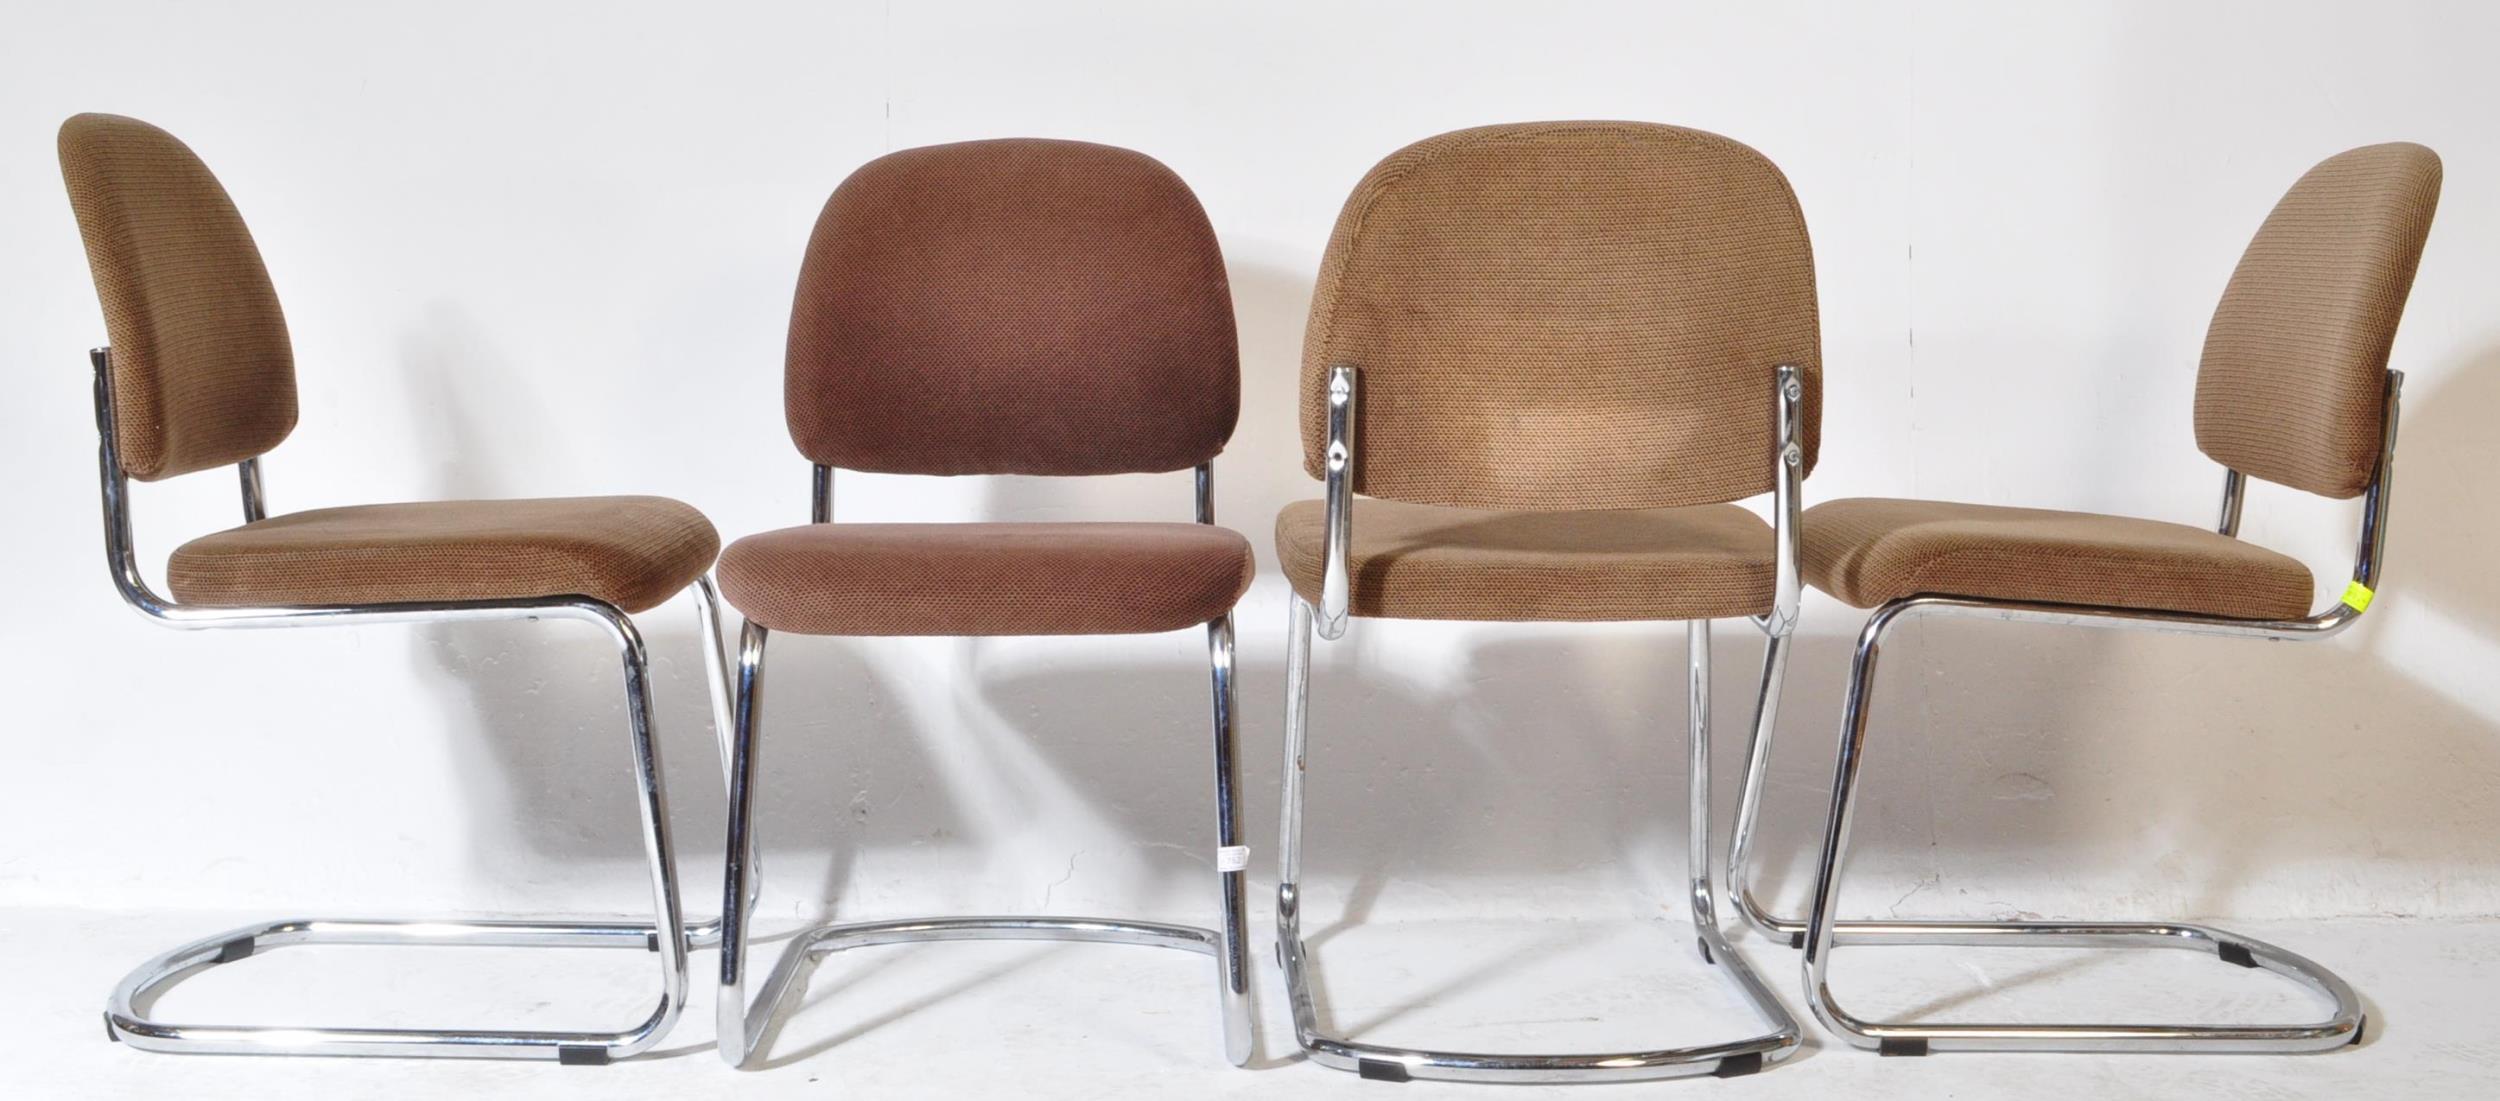 FOUR RETRO VINTAGE ERGONOMIC CANTILEVER OFFICE CHAIRS - Image 3 of 5